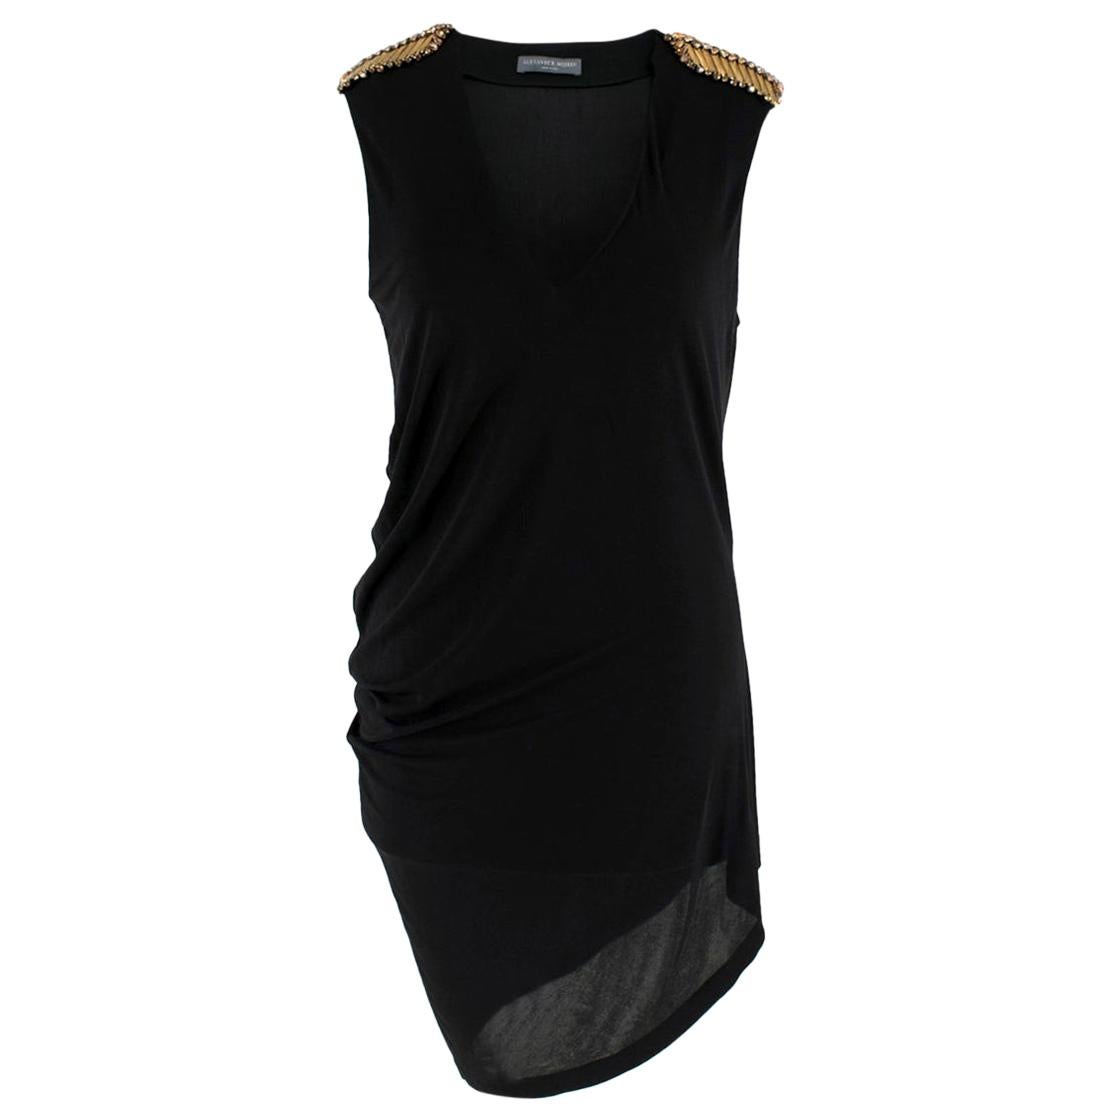 Alexander McQueen Black Tunic Top with Crystal Embellished Shoulders - Size US 6 For Sale